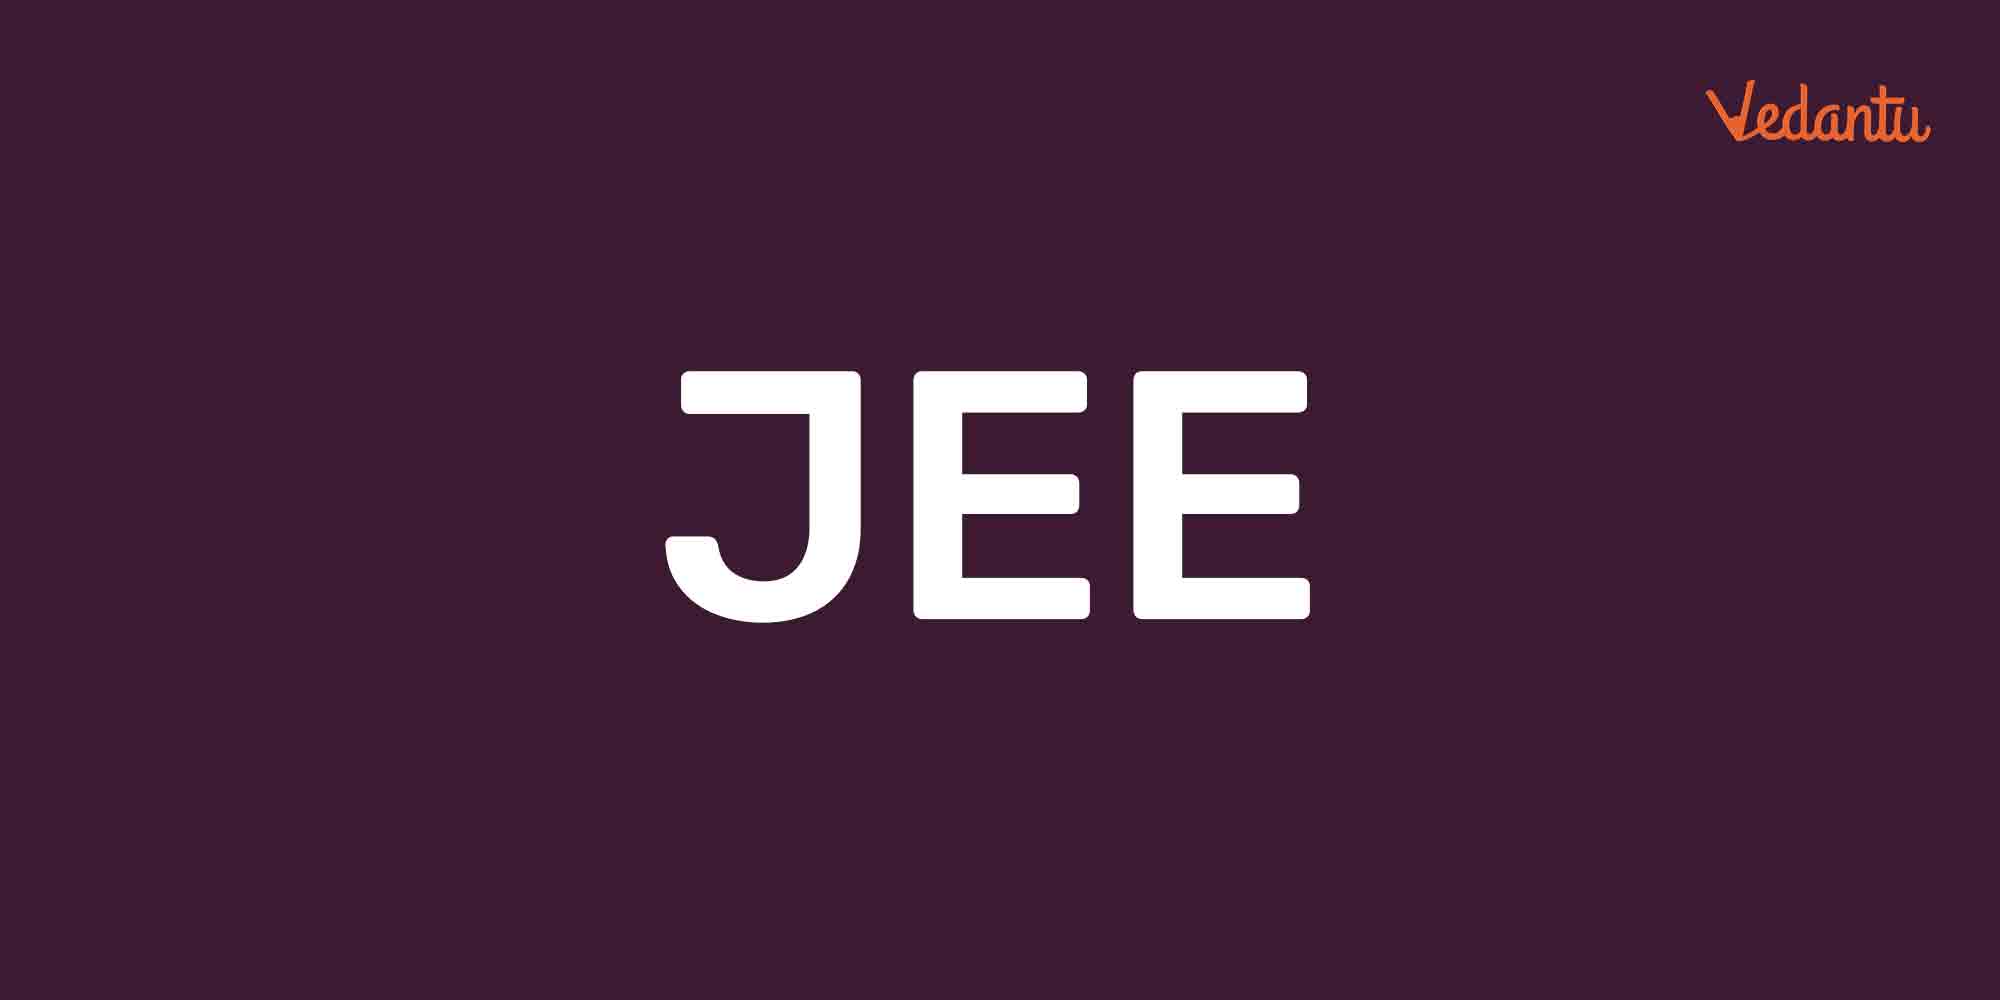 Success Stories on how to achieve 99 percentile and above in JEE.